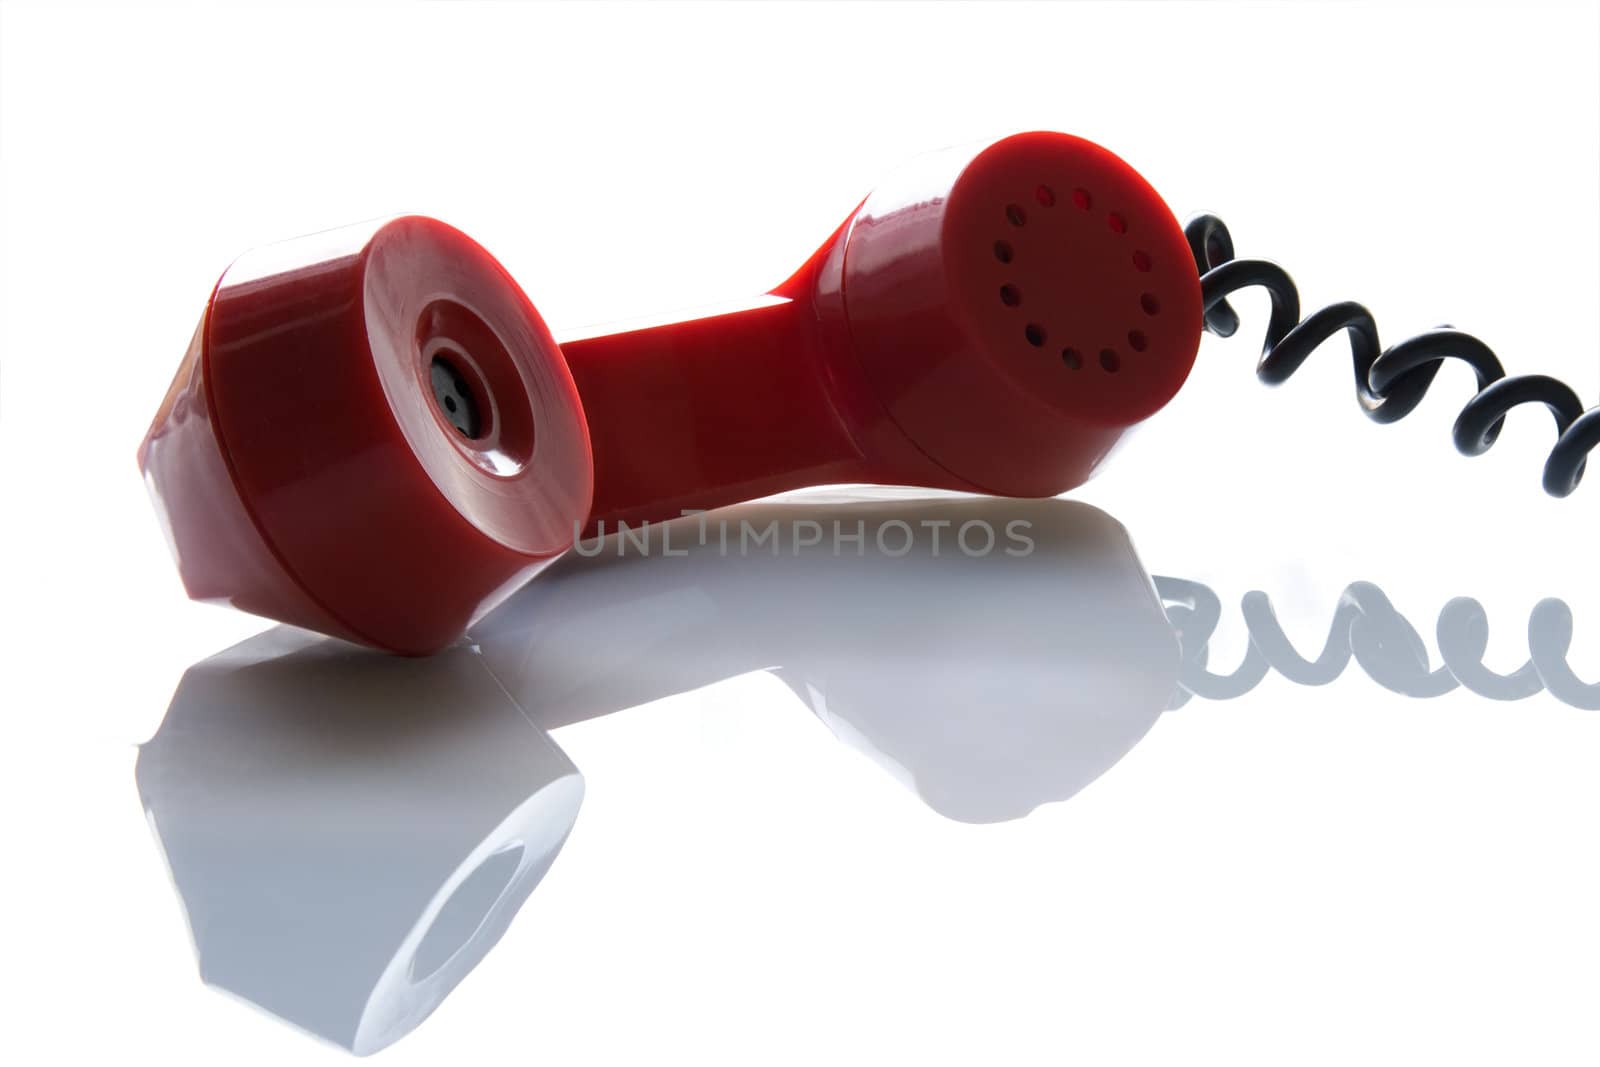 Old telephone tube on a white background